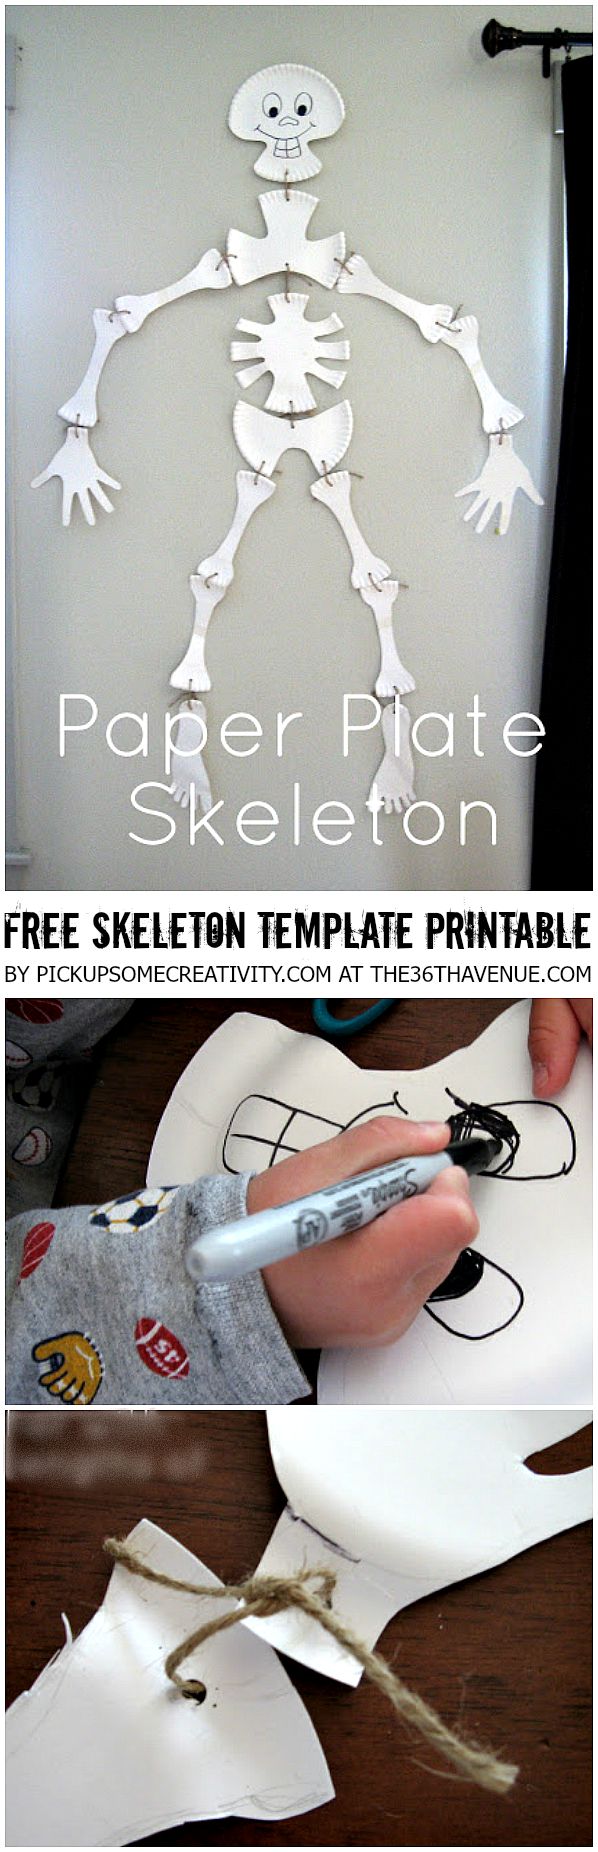 Halloween Crafts - Paper Plate Skeleton and Free Skeleton Template Printable at the36thavenue.com 